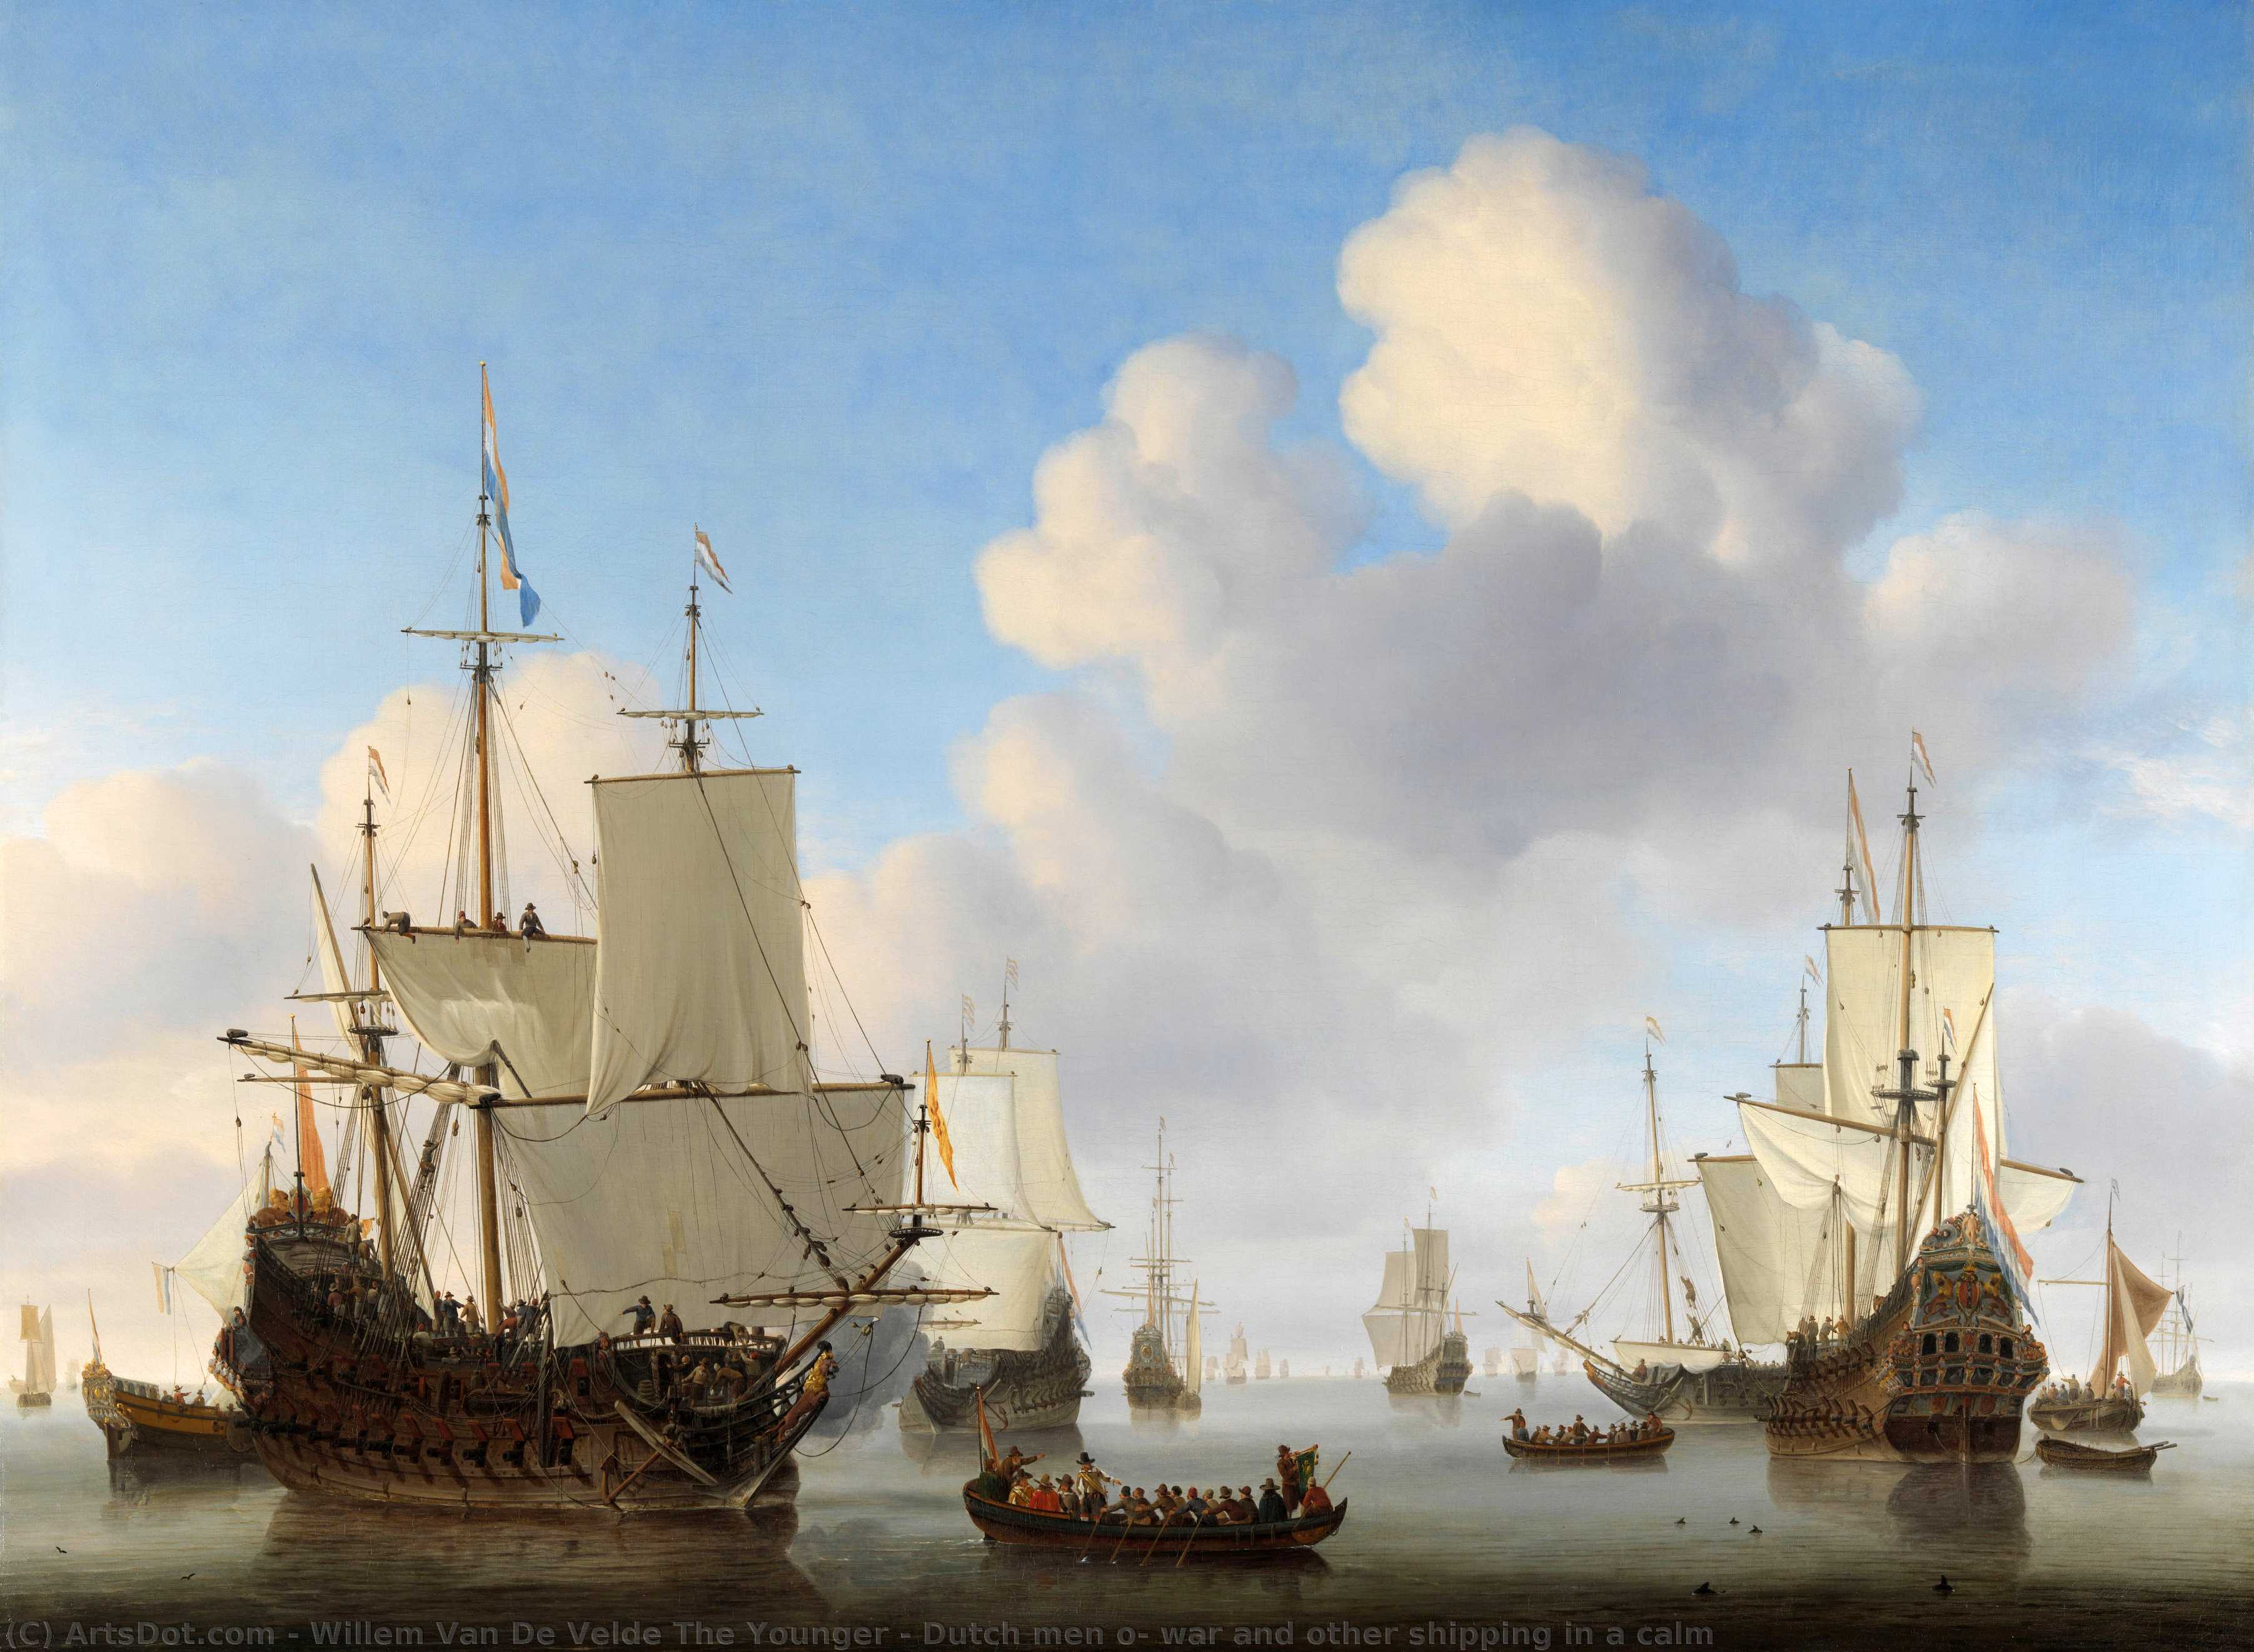 Order Art Reproductions Dutch men o` war and other shipping in a calm, 1655 by Velde Willem Van De The Younger (1633-1707, Netherlands) | ArtsDot.com